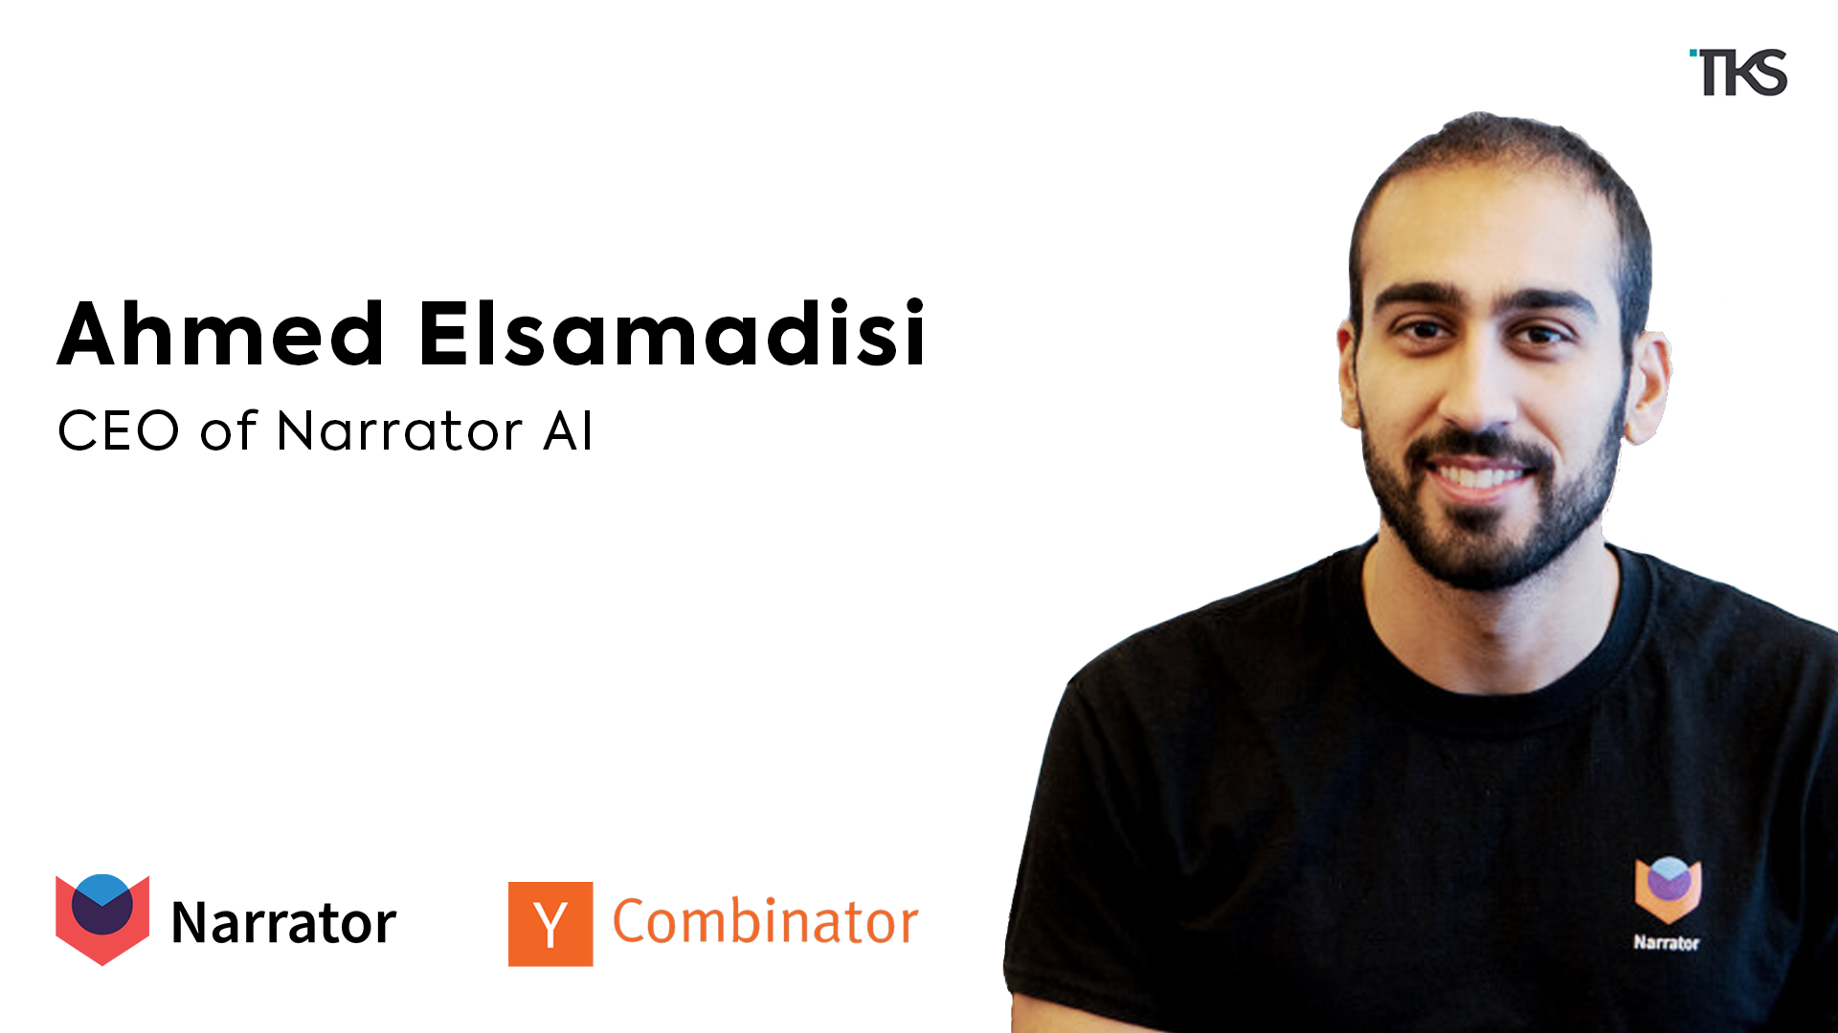 Making sense of data: Ahmed Elsamadisi’s AI solution to unwieldy data management